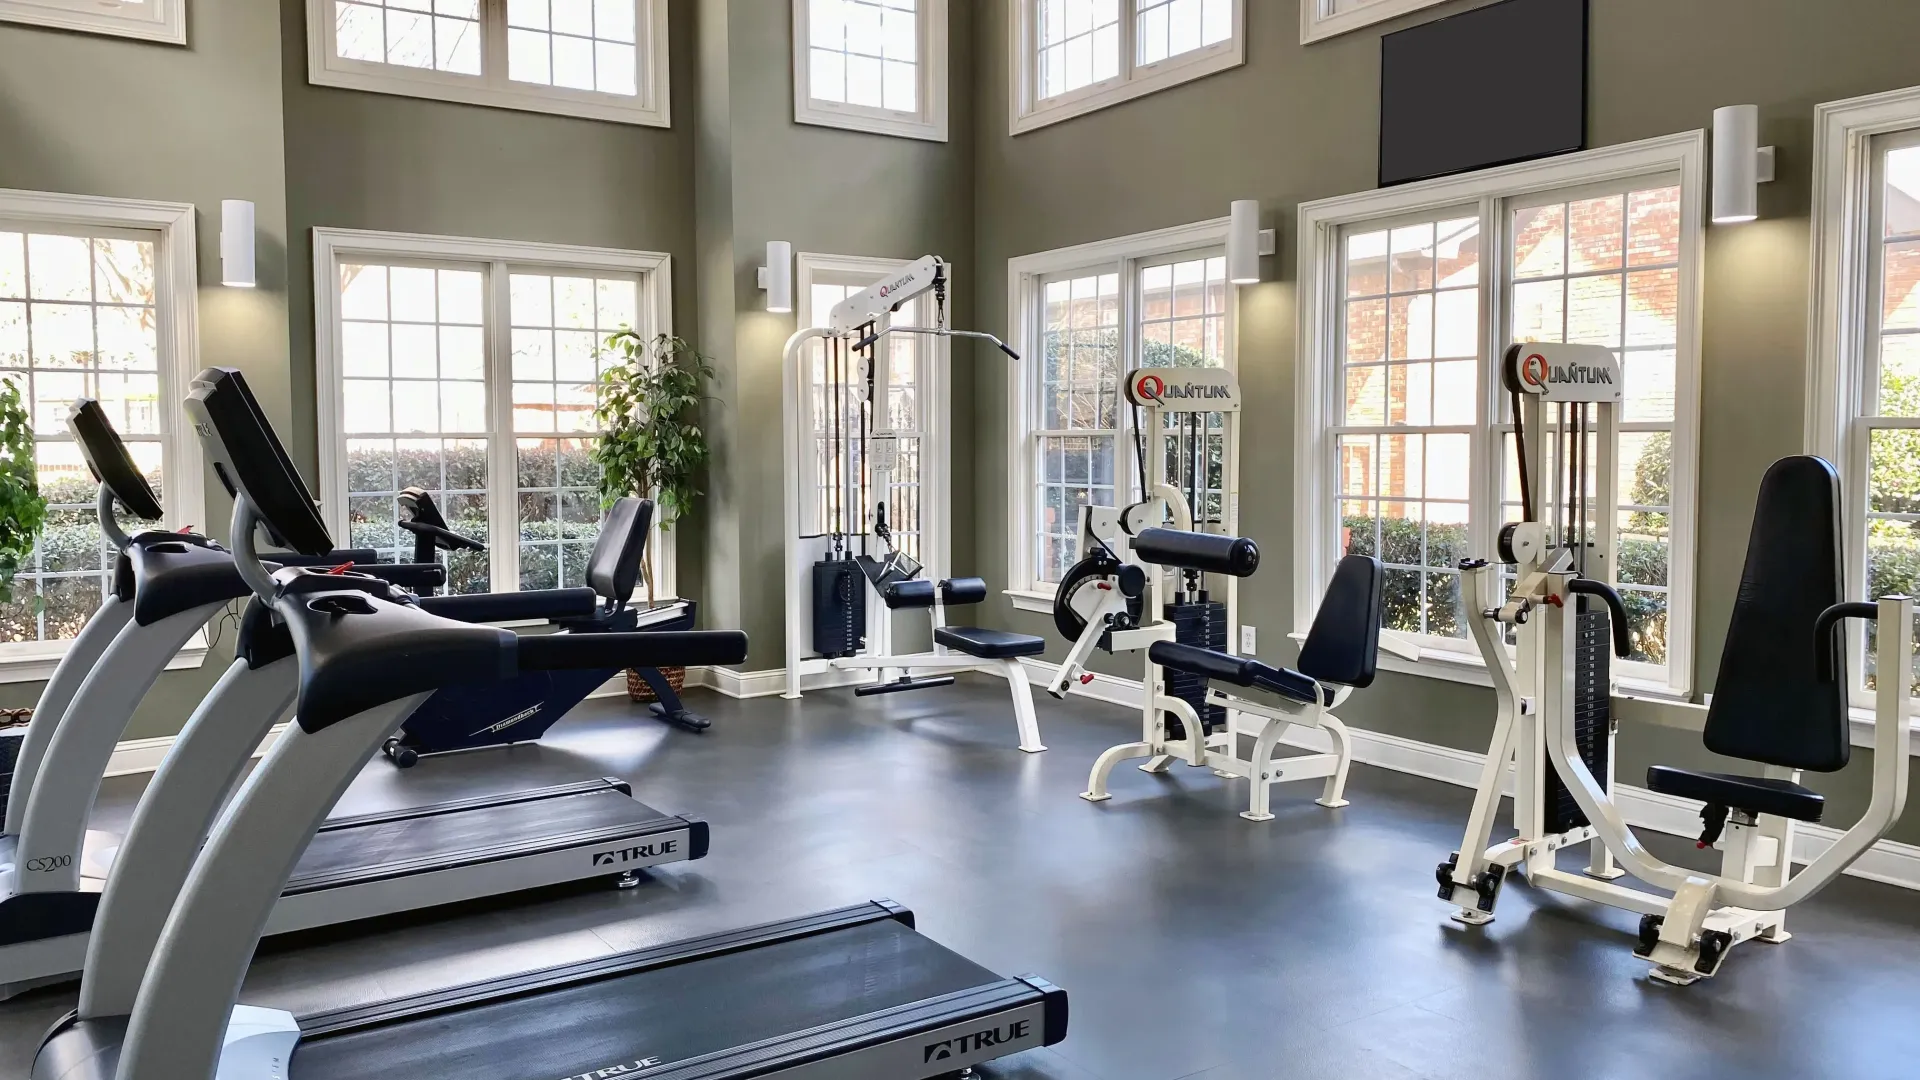 A spacious gym with tall ceilings and large windows offering abundant natural lighting, complete with rows of weight training machines and cardio equipment.